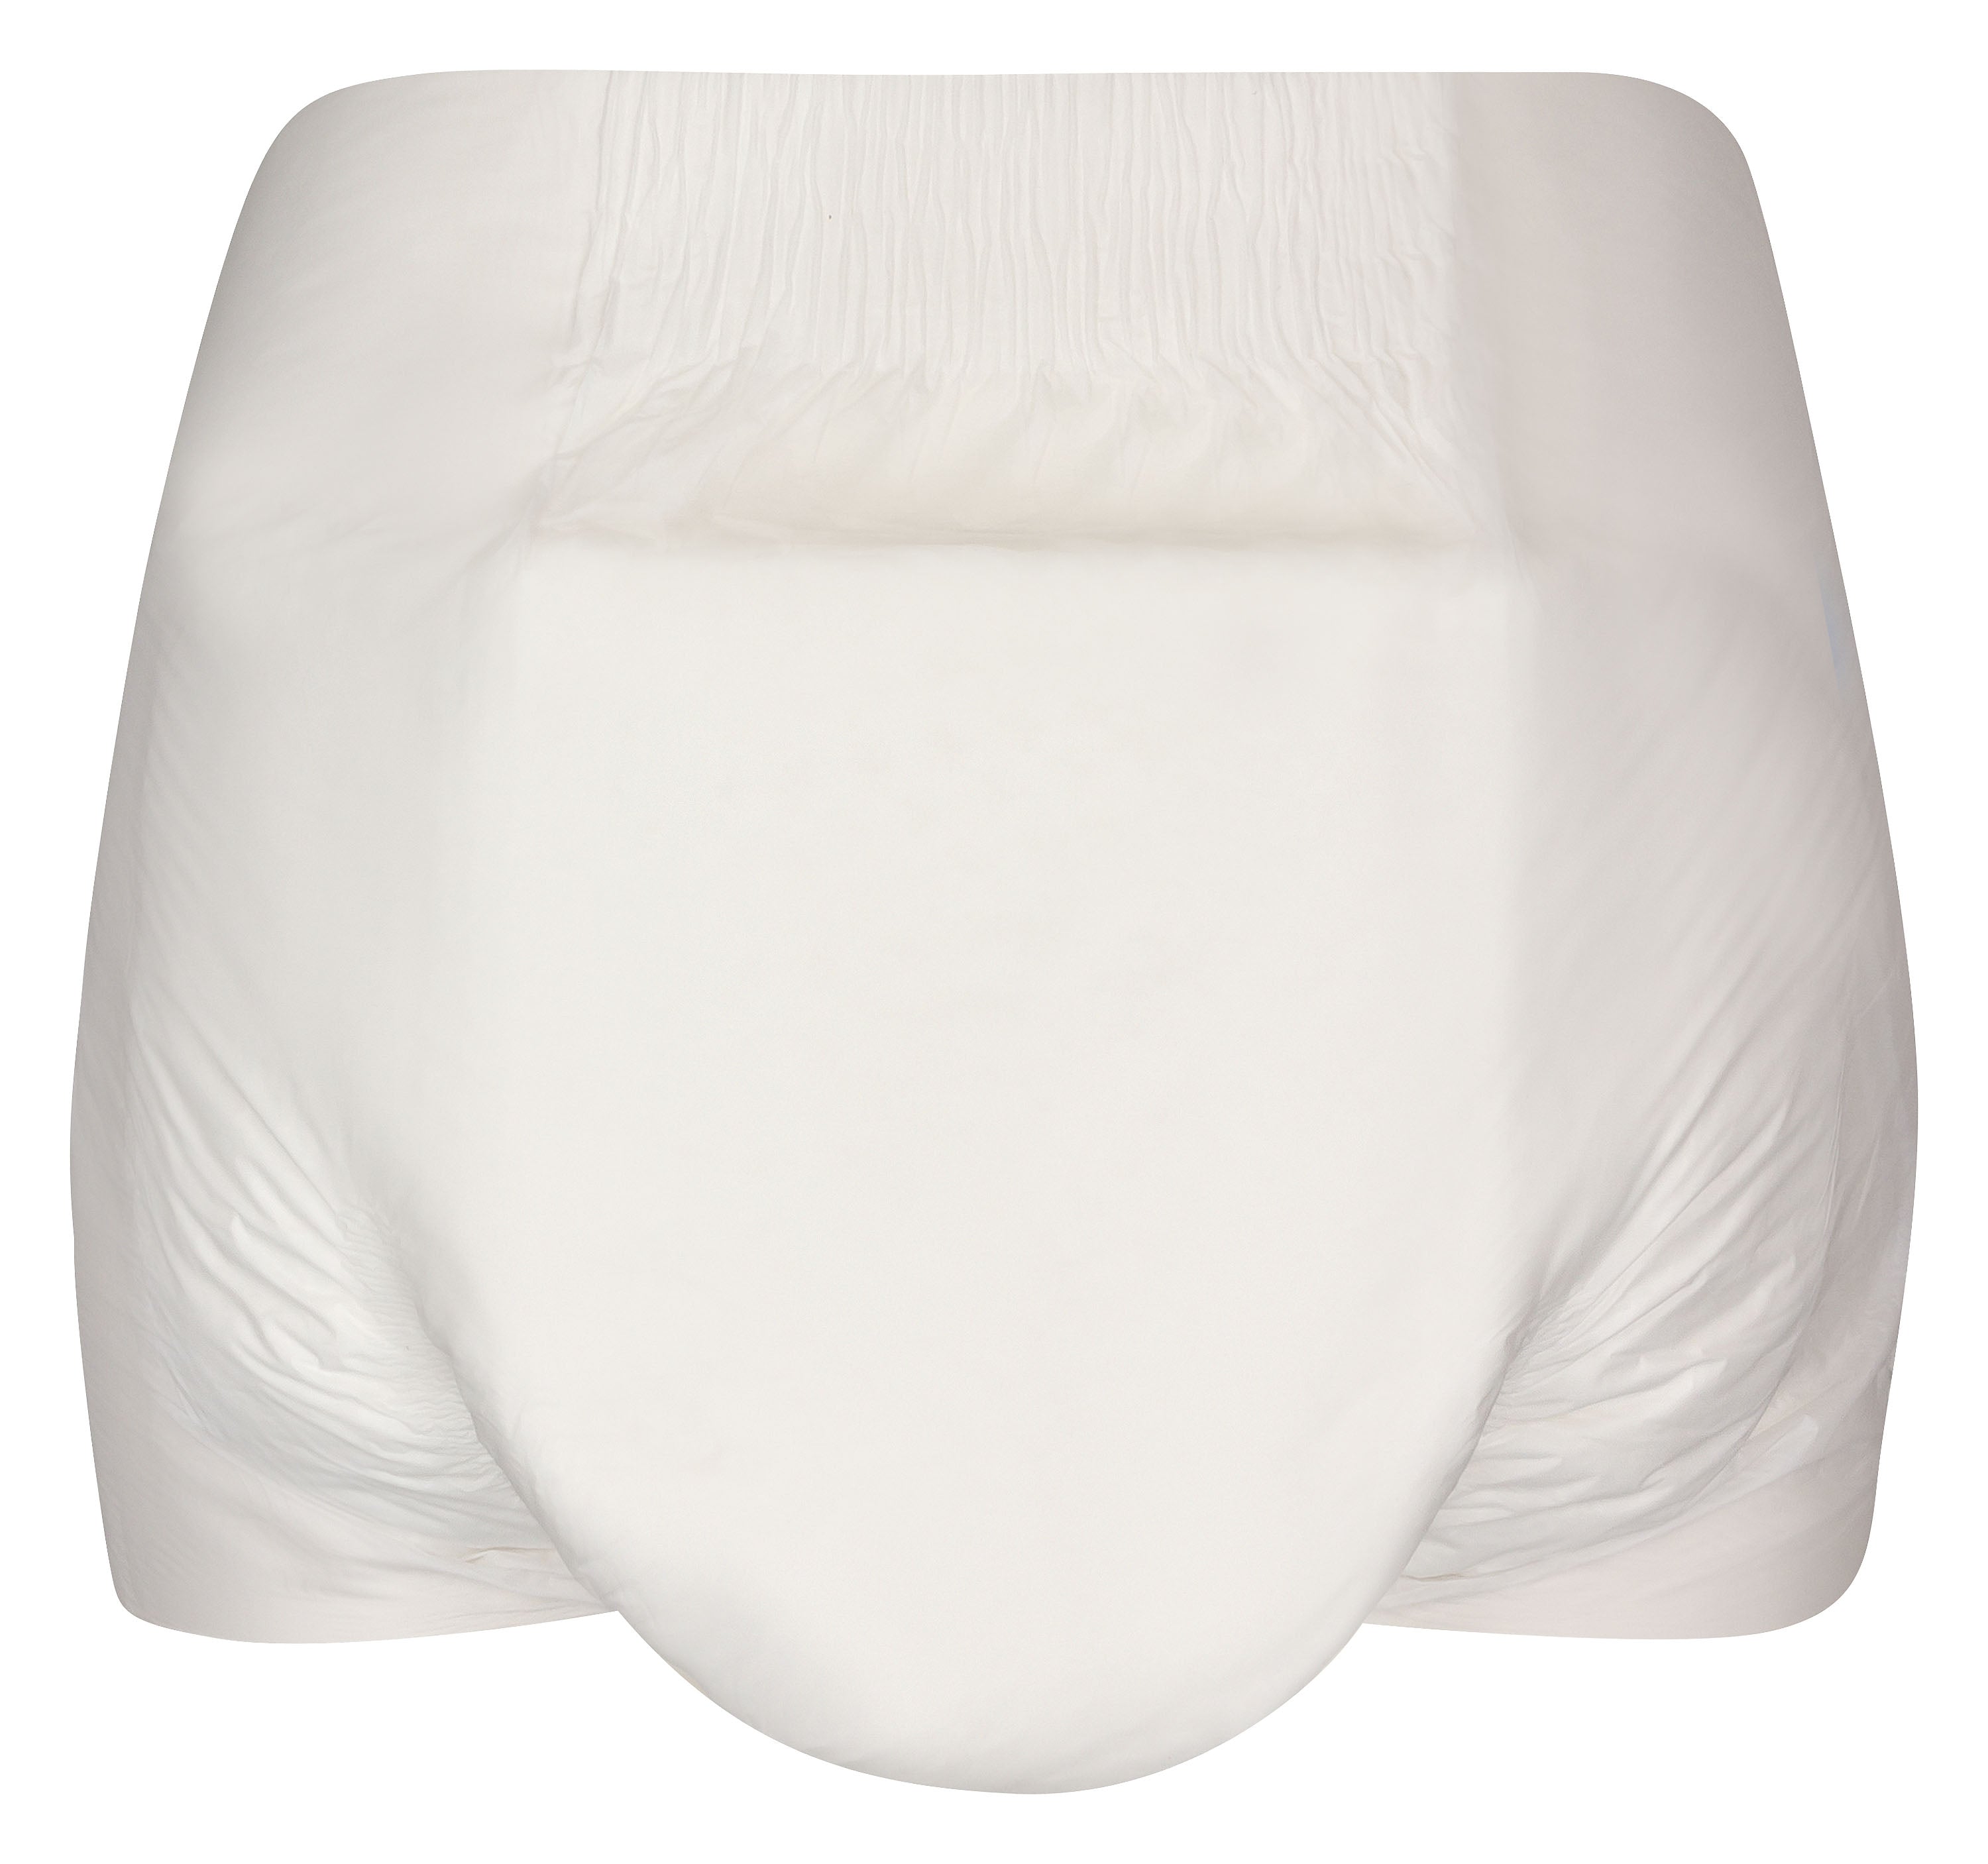 BetterDry 10 adult diaper back view - for maximum protection for heavy incontinence.